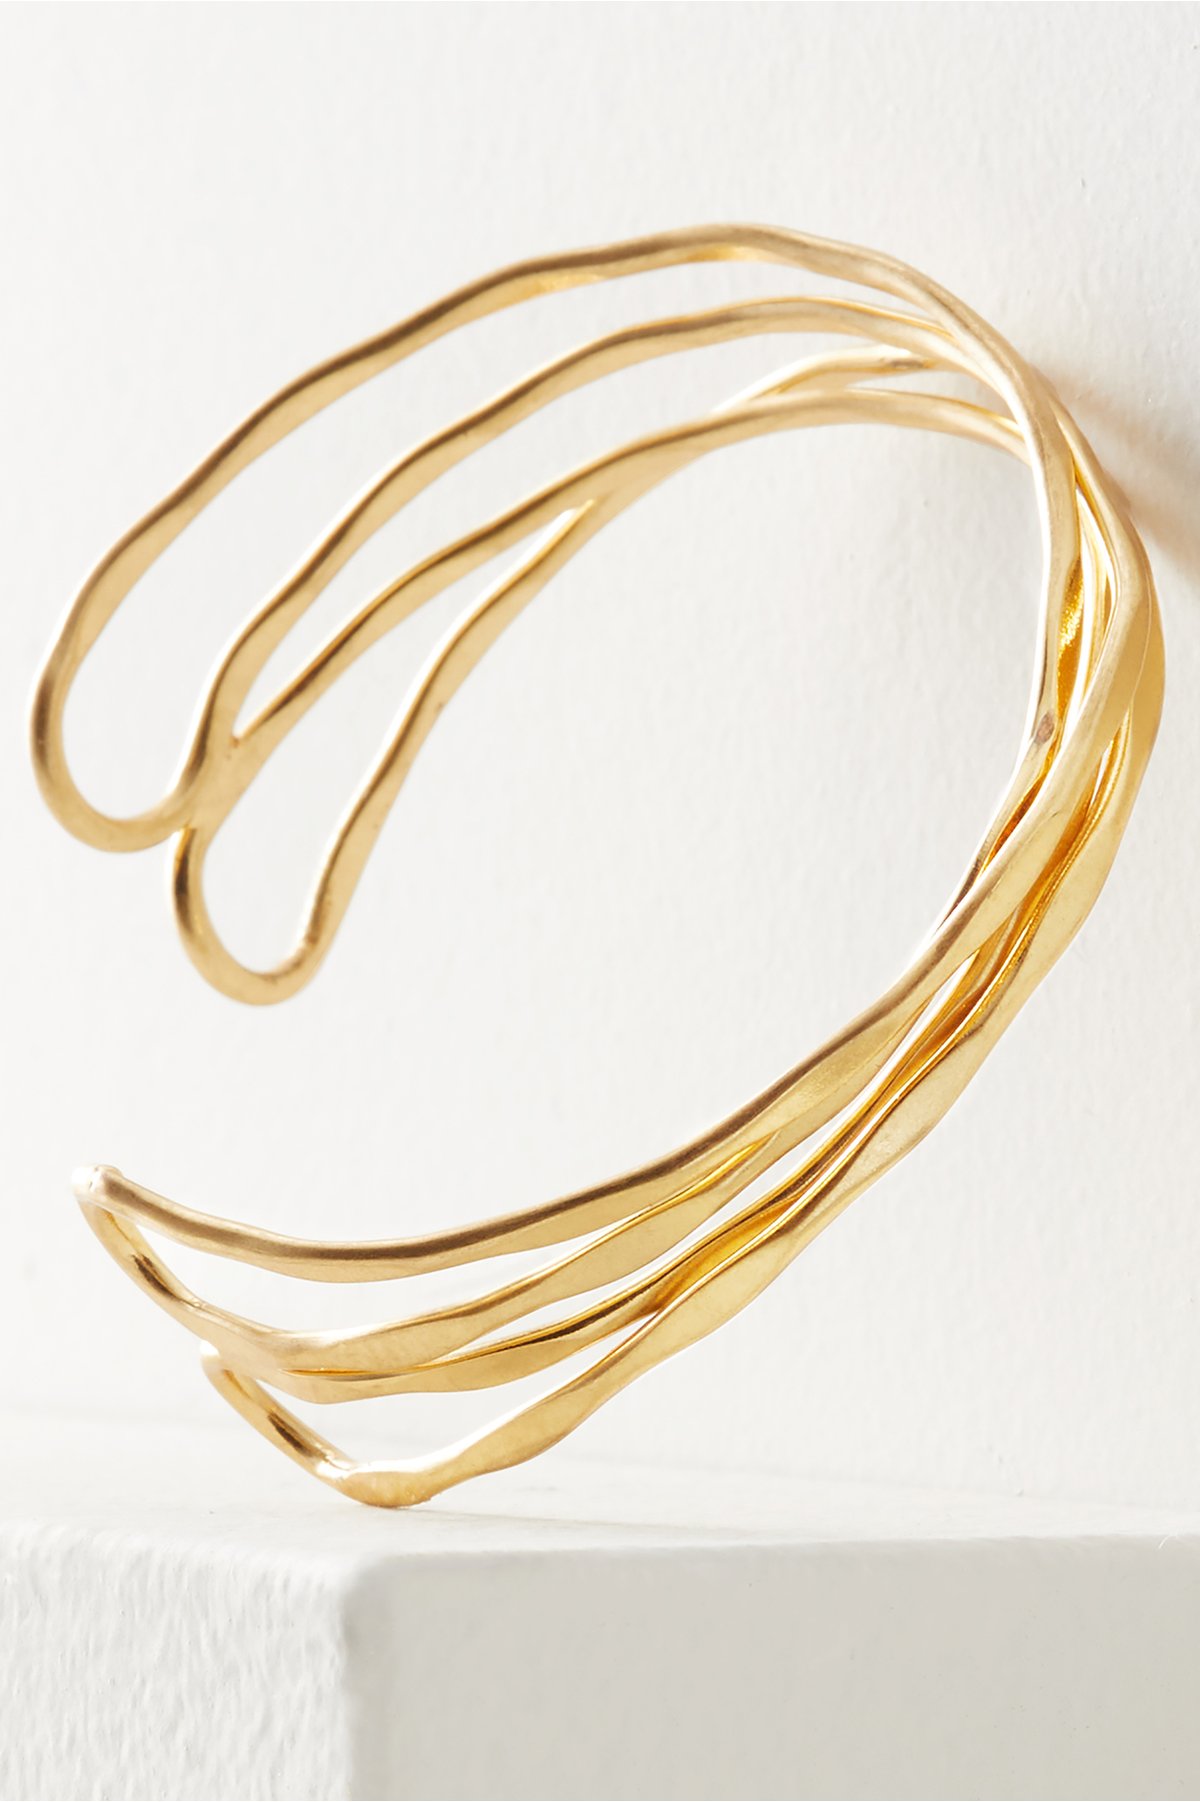 Linnet Thin Cuff by Soft Surroundings, in Gold siz...